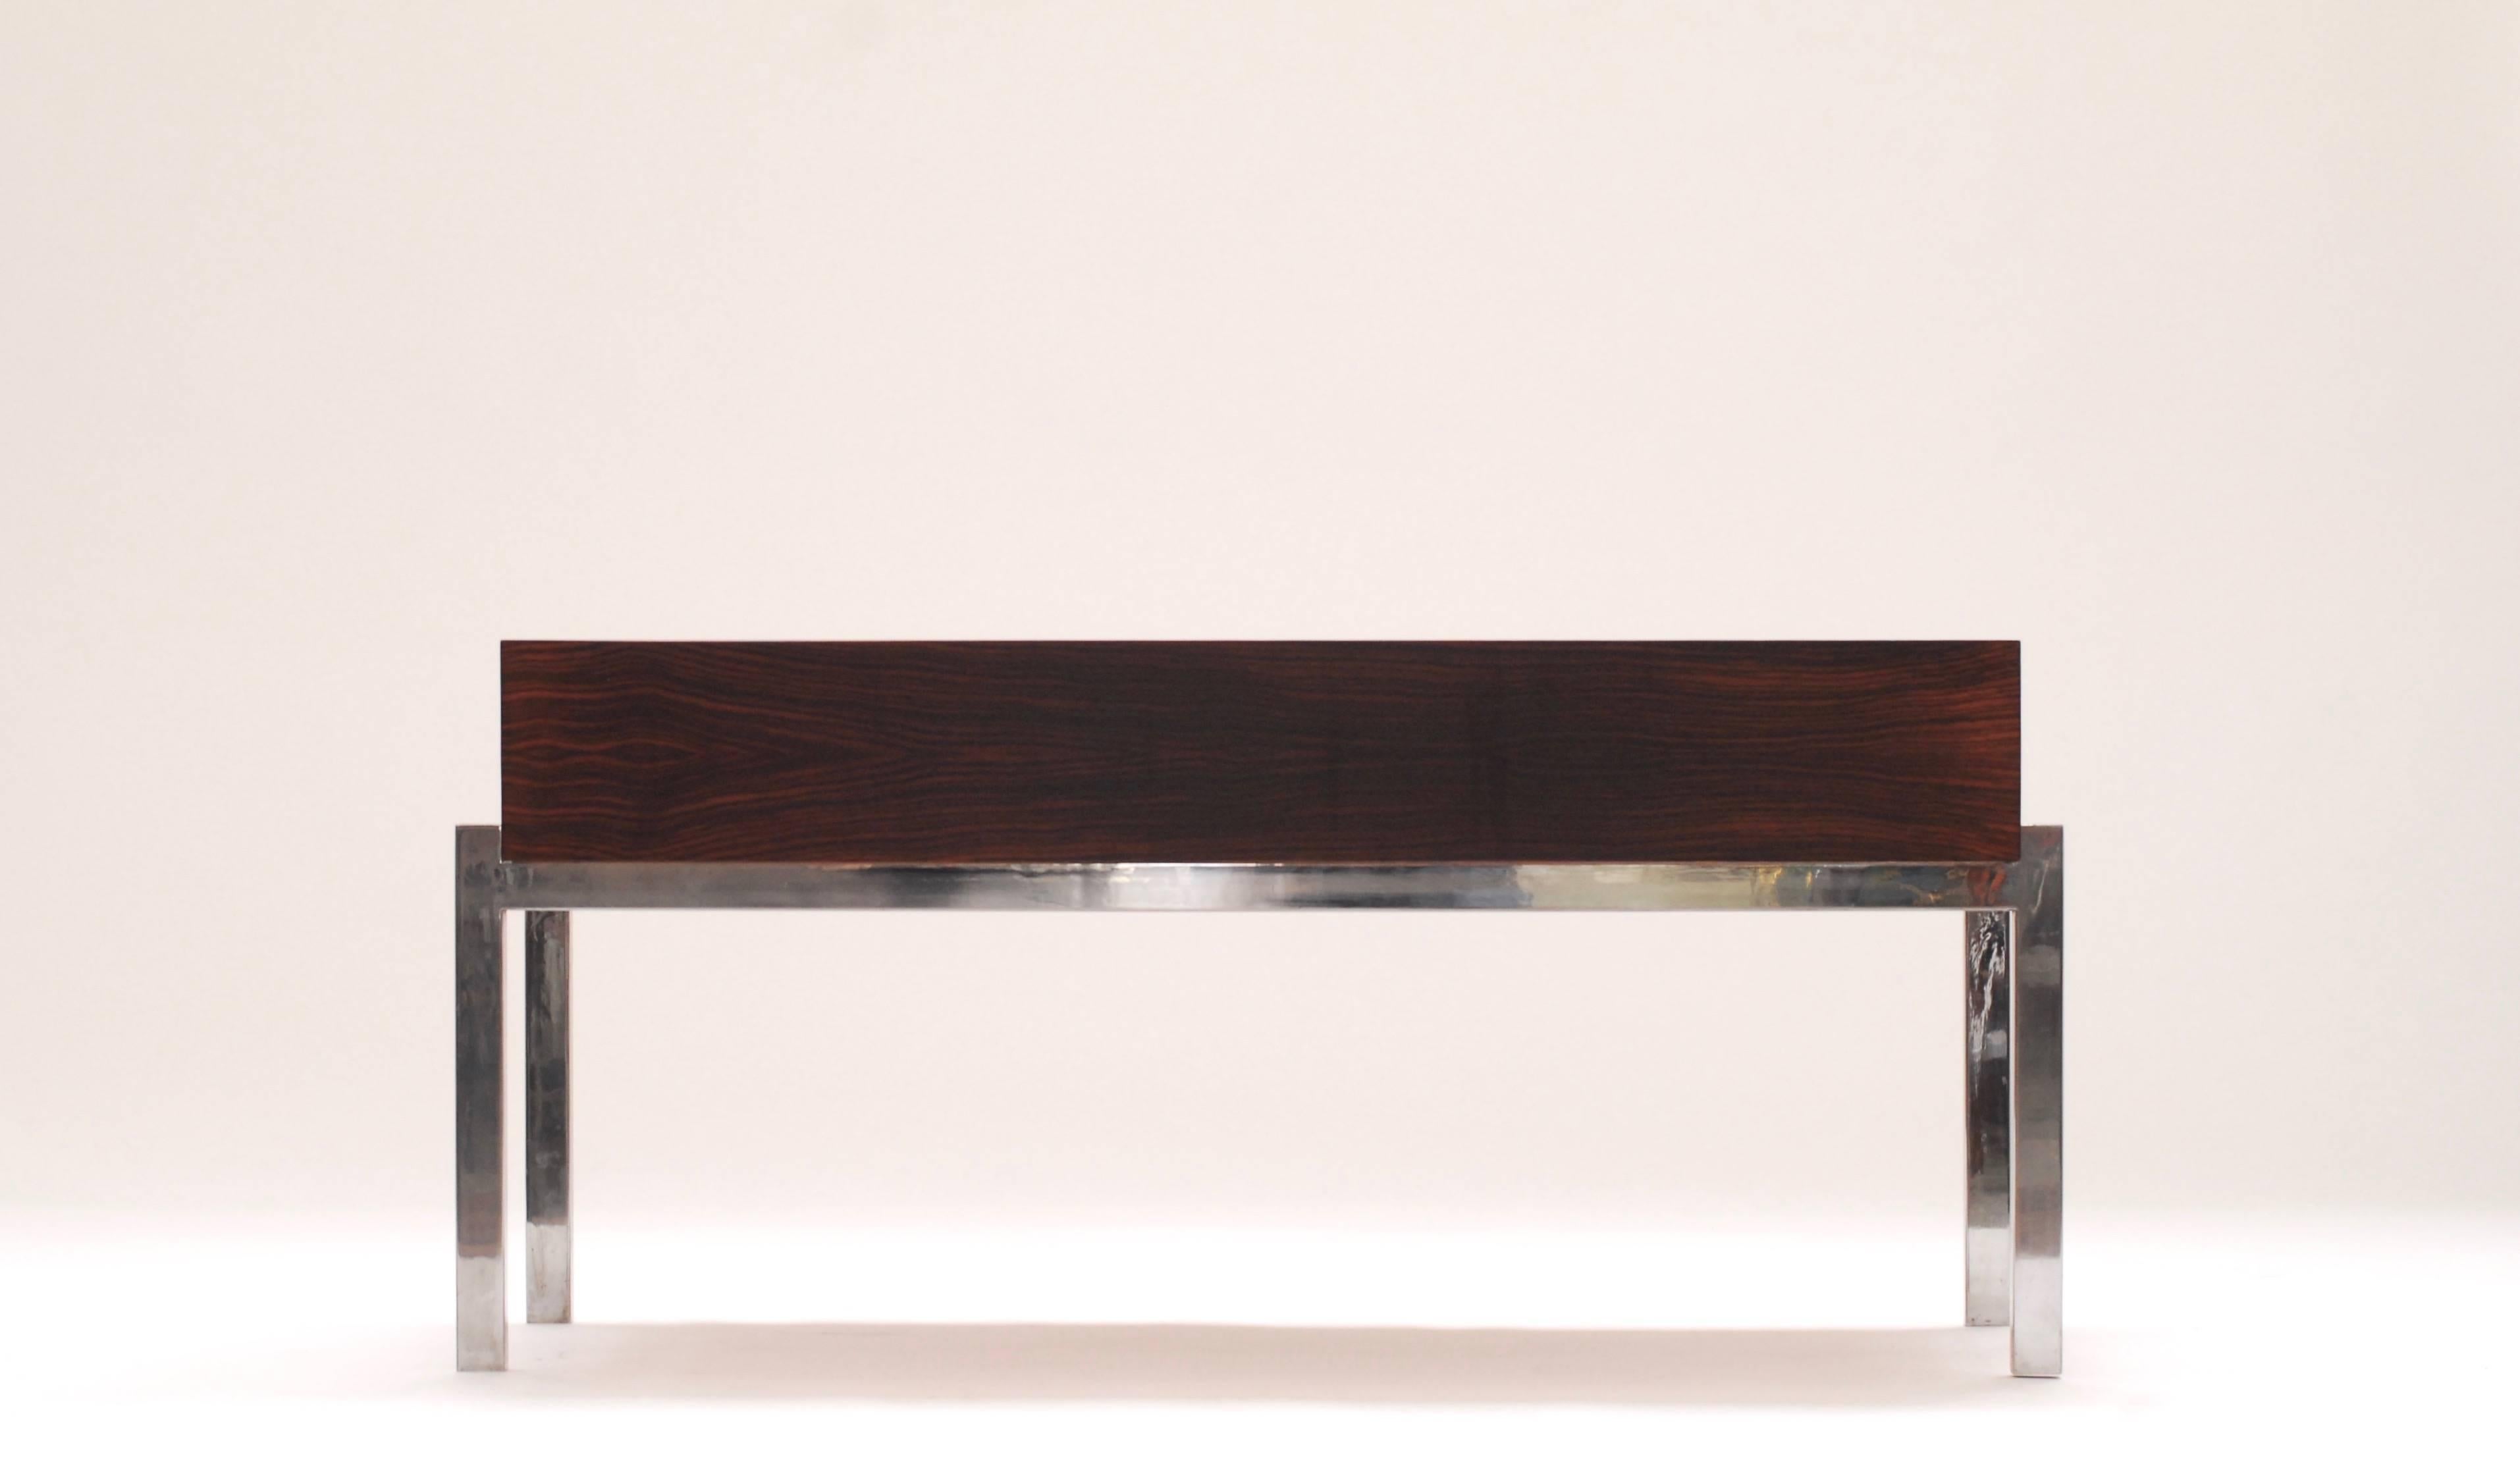 Well proportioned rosewood planter with metal on the inside.